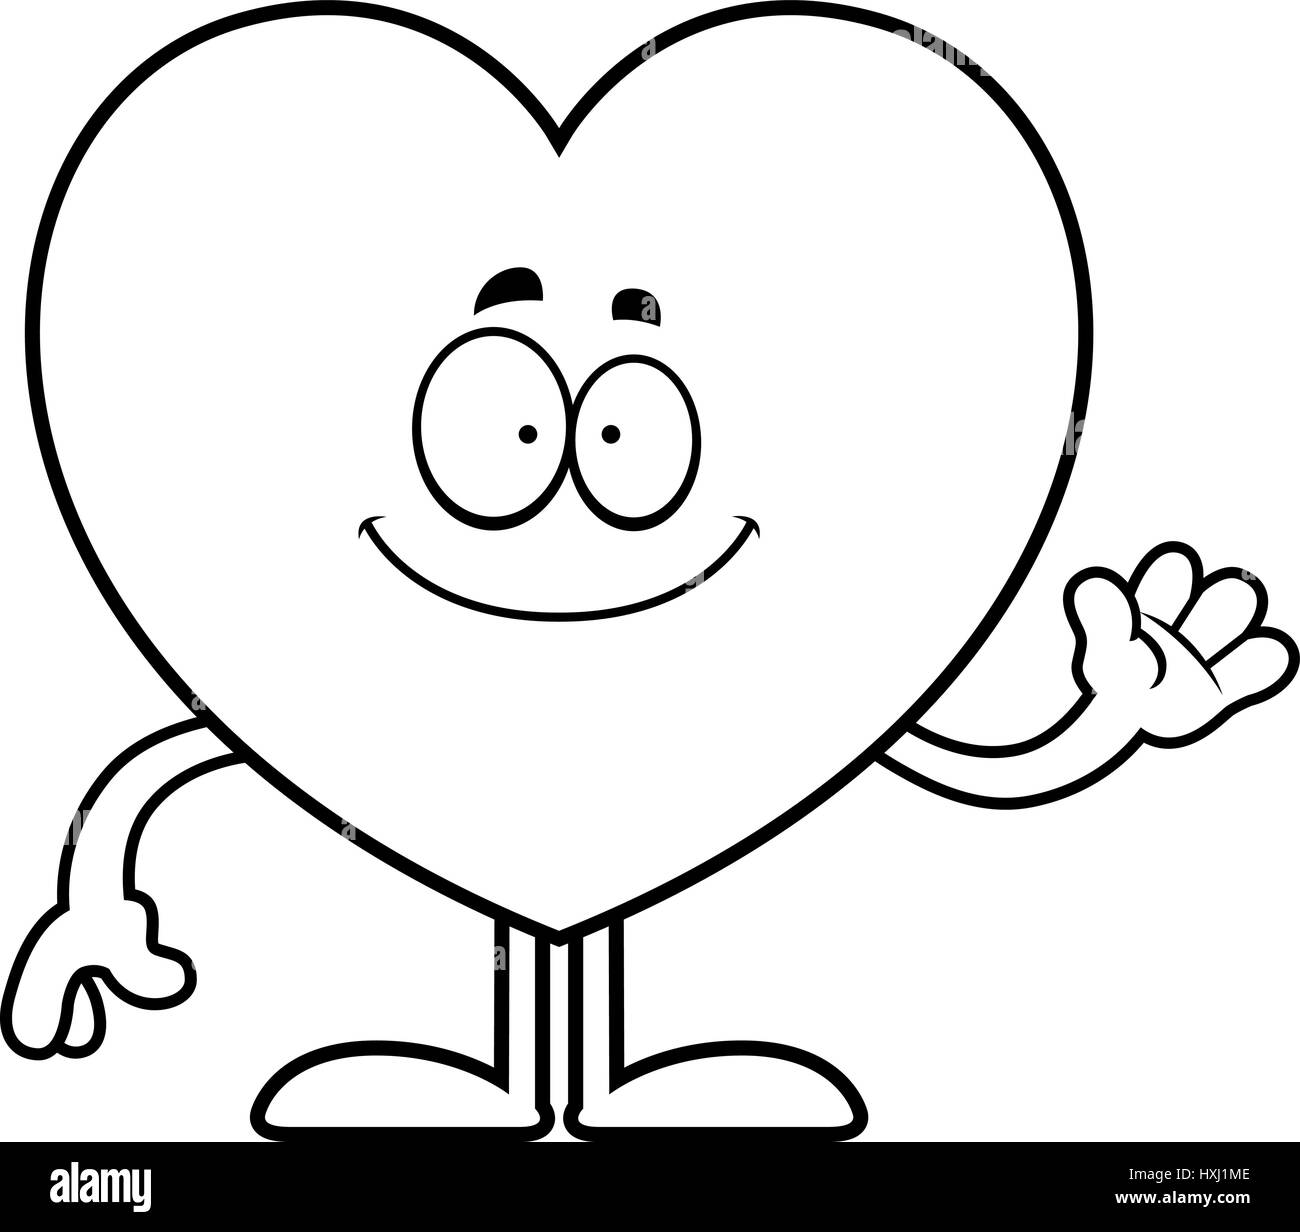 A cartoon illustration of a heart card suit waving. Stock Vector